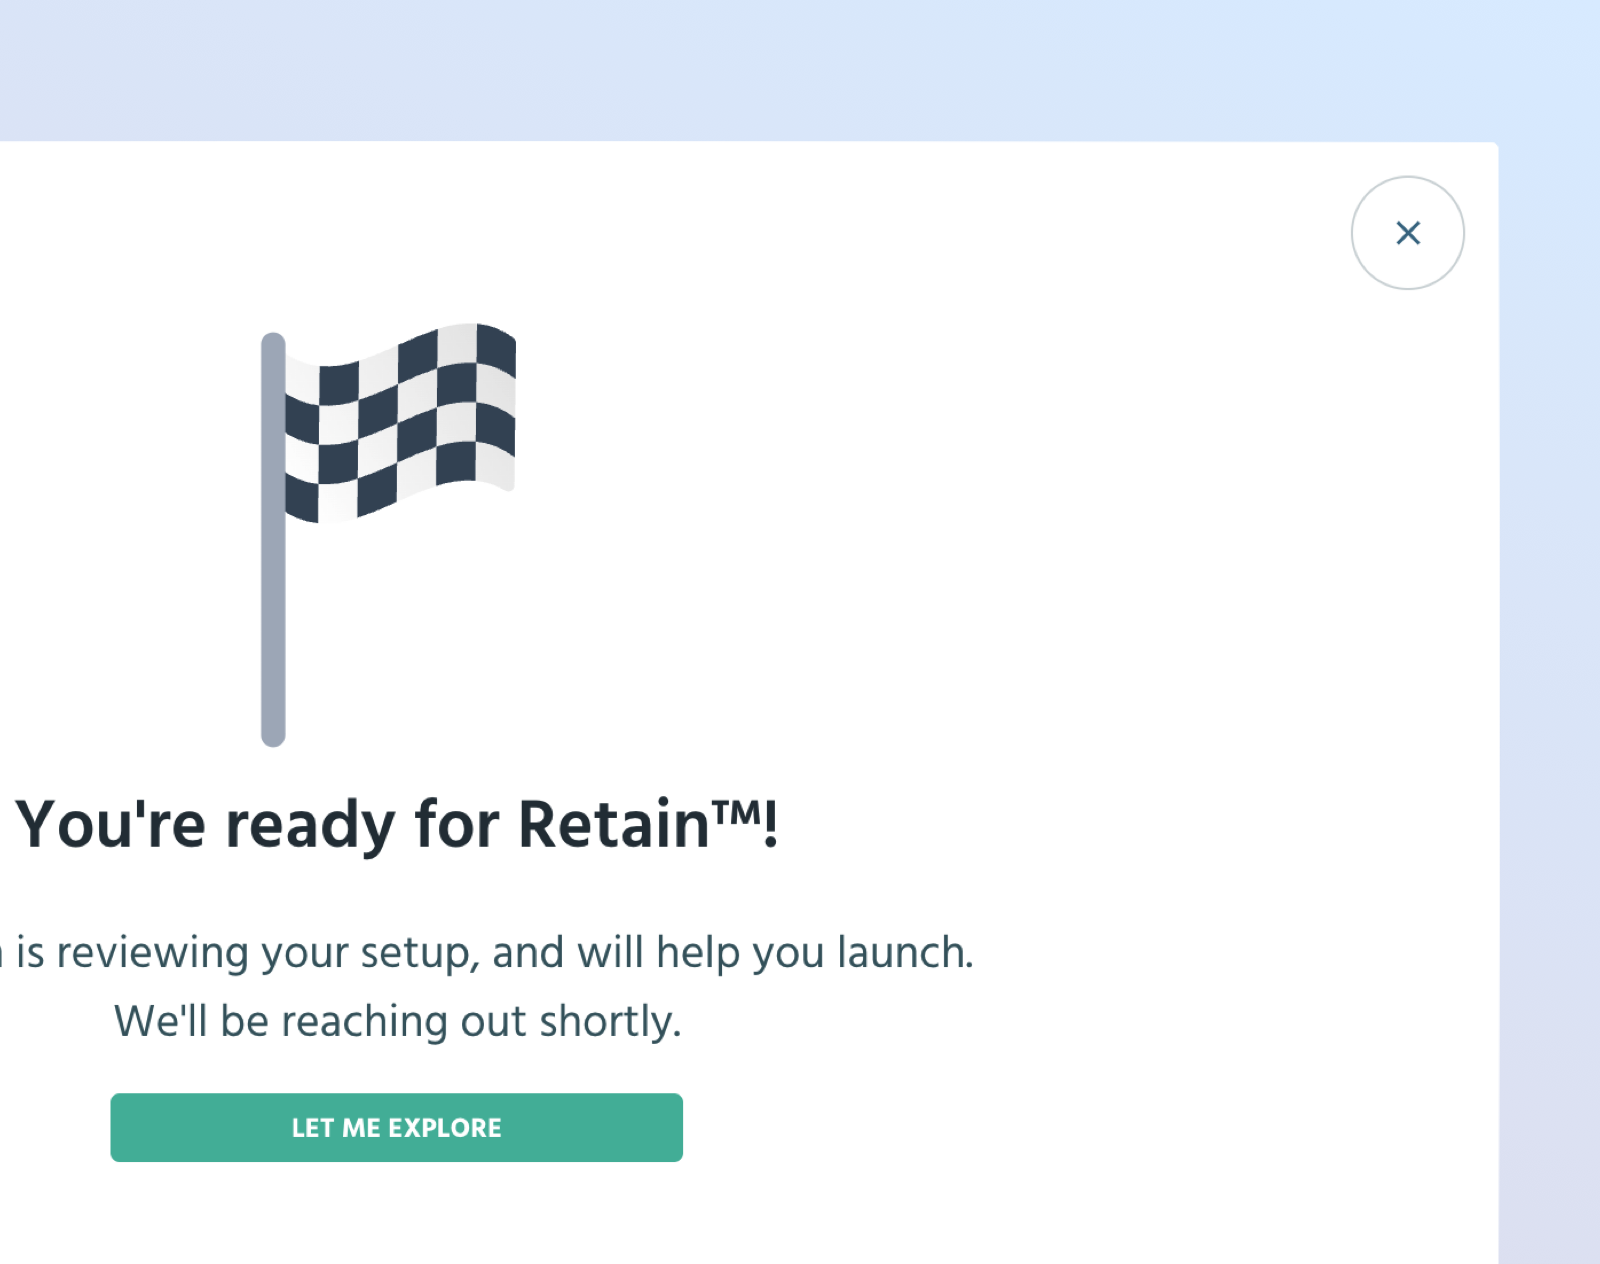 Screenshot saying You're ready for Retain! There is a chequered flag, like used in racing. There's a button that says: let me explore.